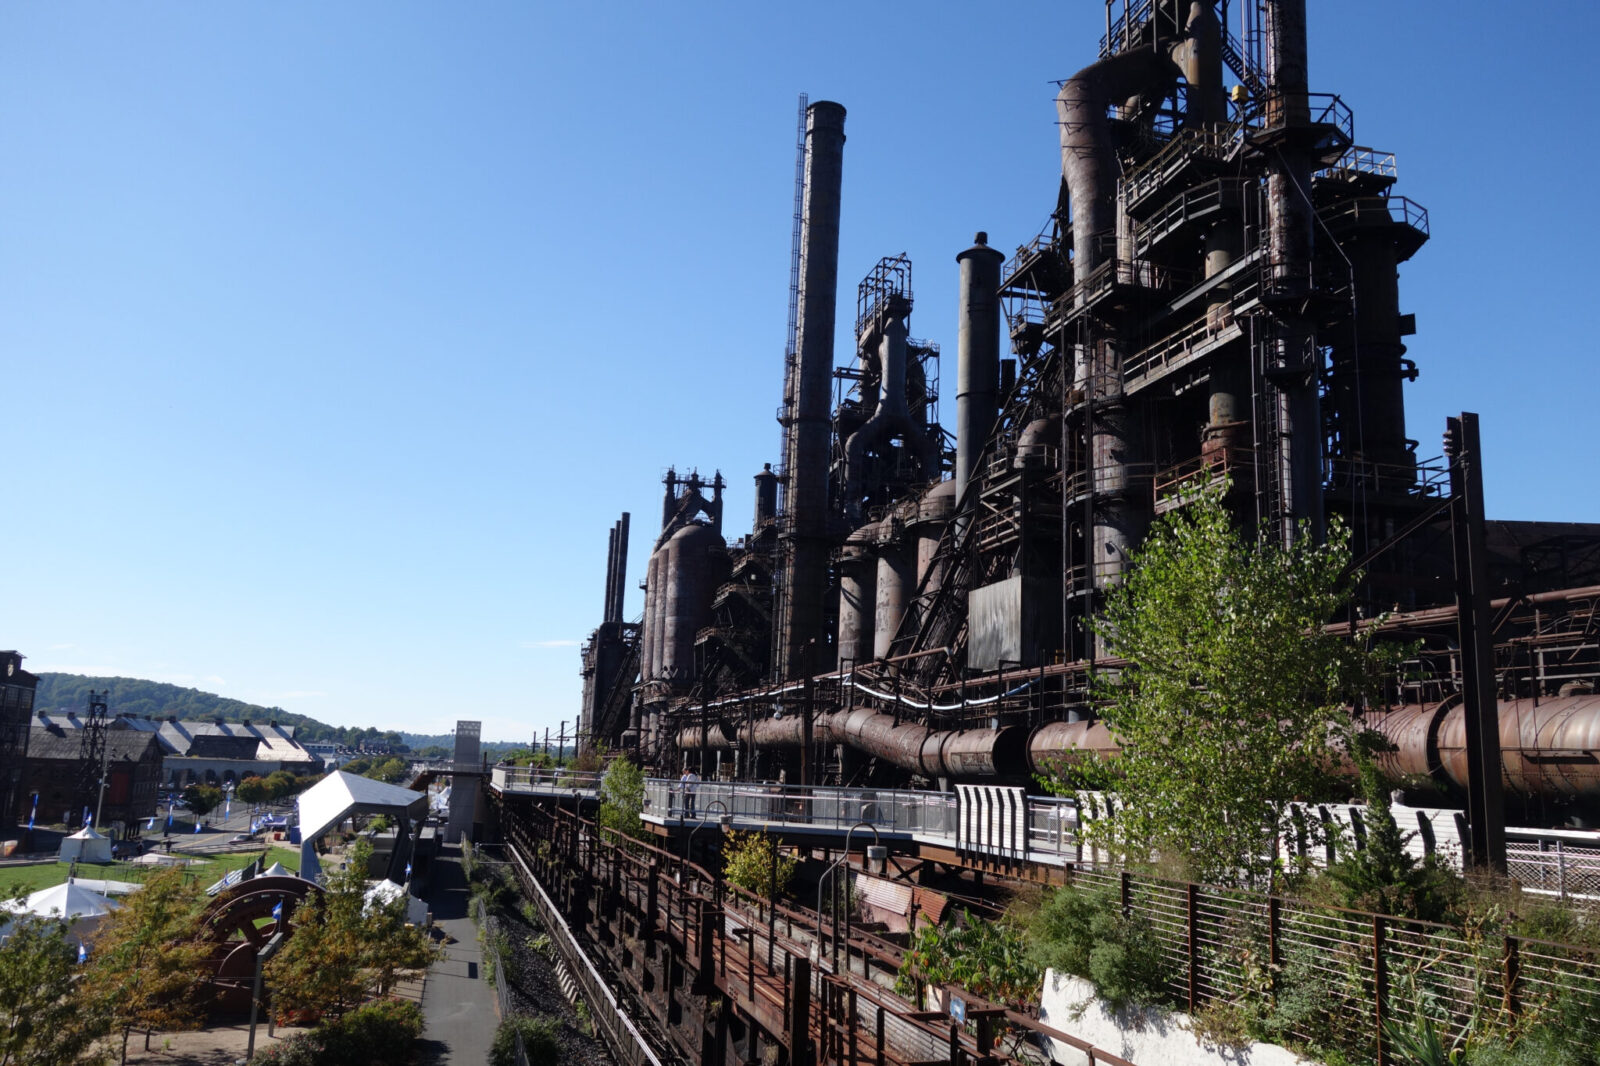 Bethlehem Steel in Bethlehem, Pa., was converted into the 10-acre SteelStacks campus, which hosts concerts, festivals, and other community events. (Wirestock images)